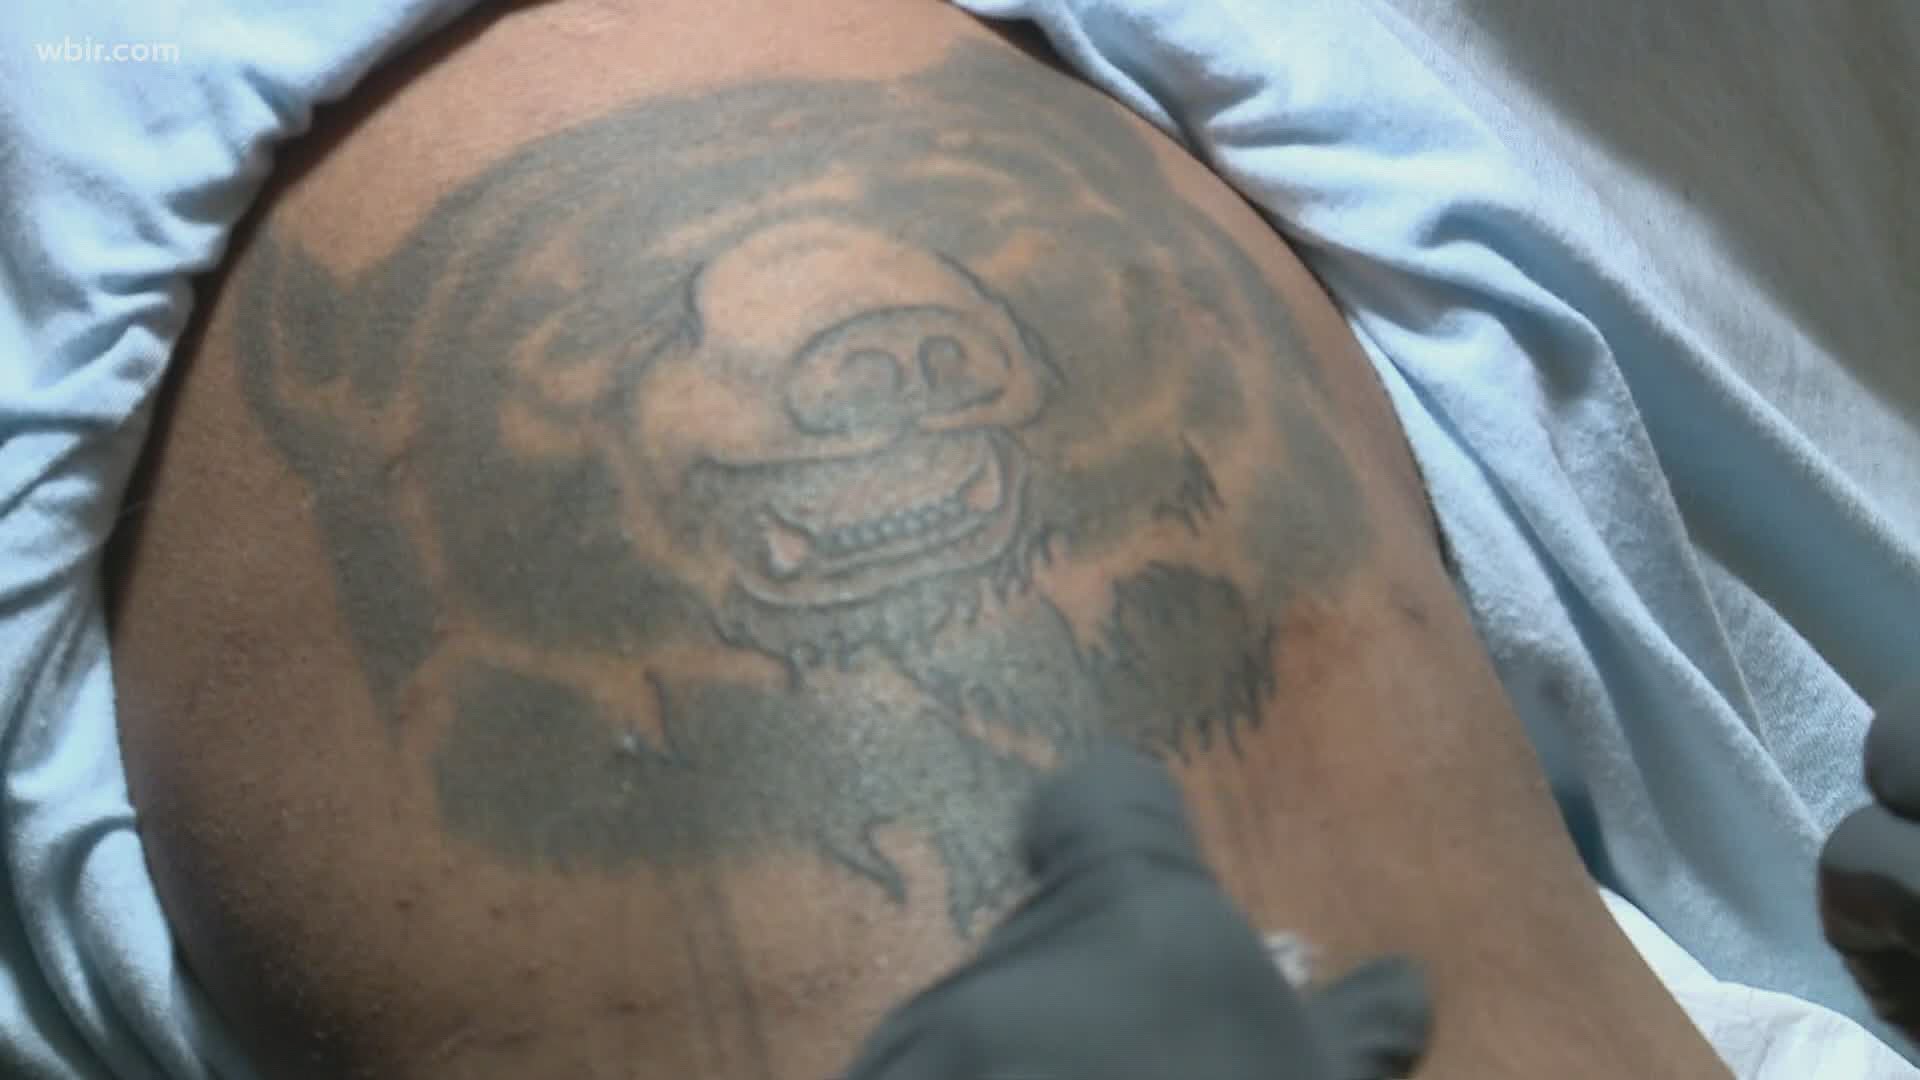 A Maryville tattoo artist is -- for free -- covering up hateful, racist tattoos.